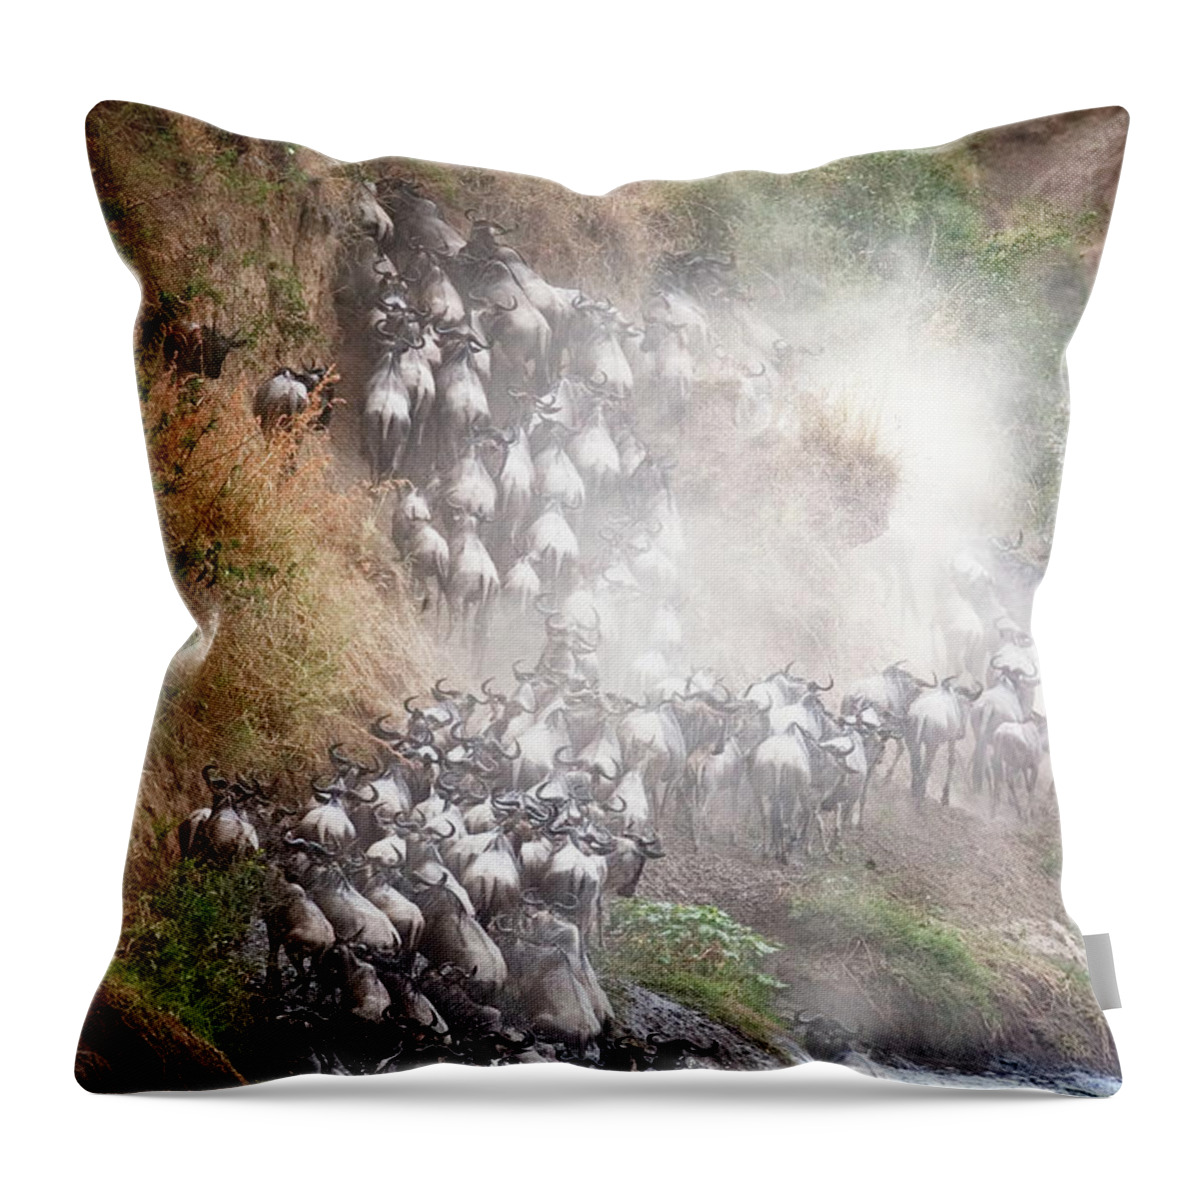 Migration Throw Pillow featuring the photograph Wildebeest Climbing Up Mara River Bank by Good Focused